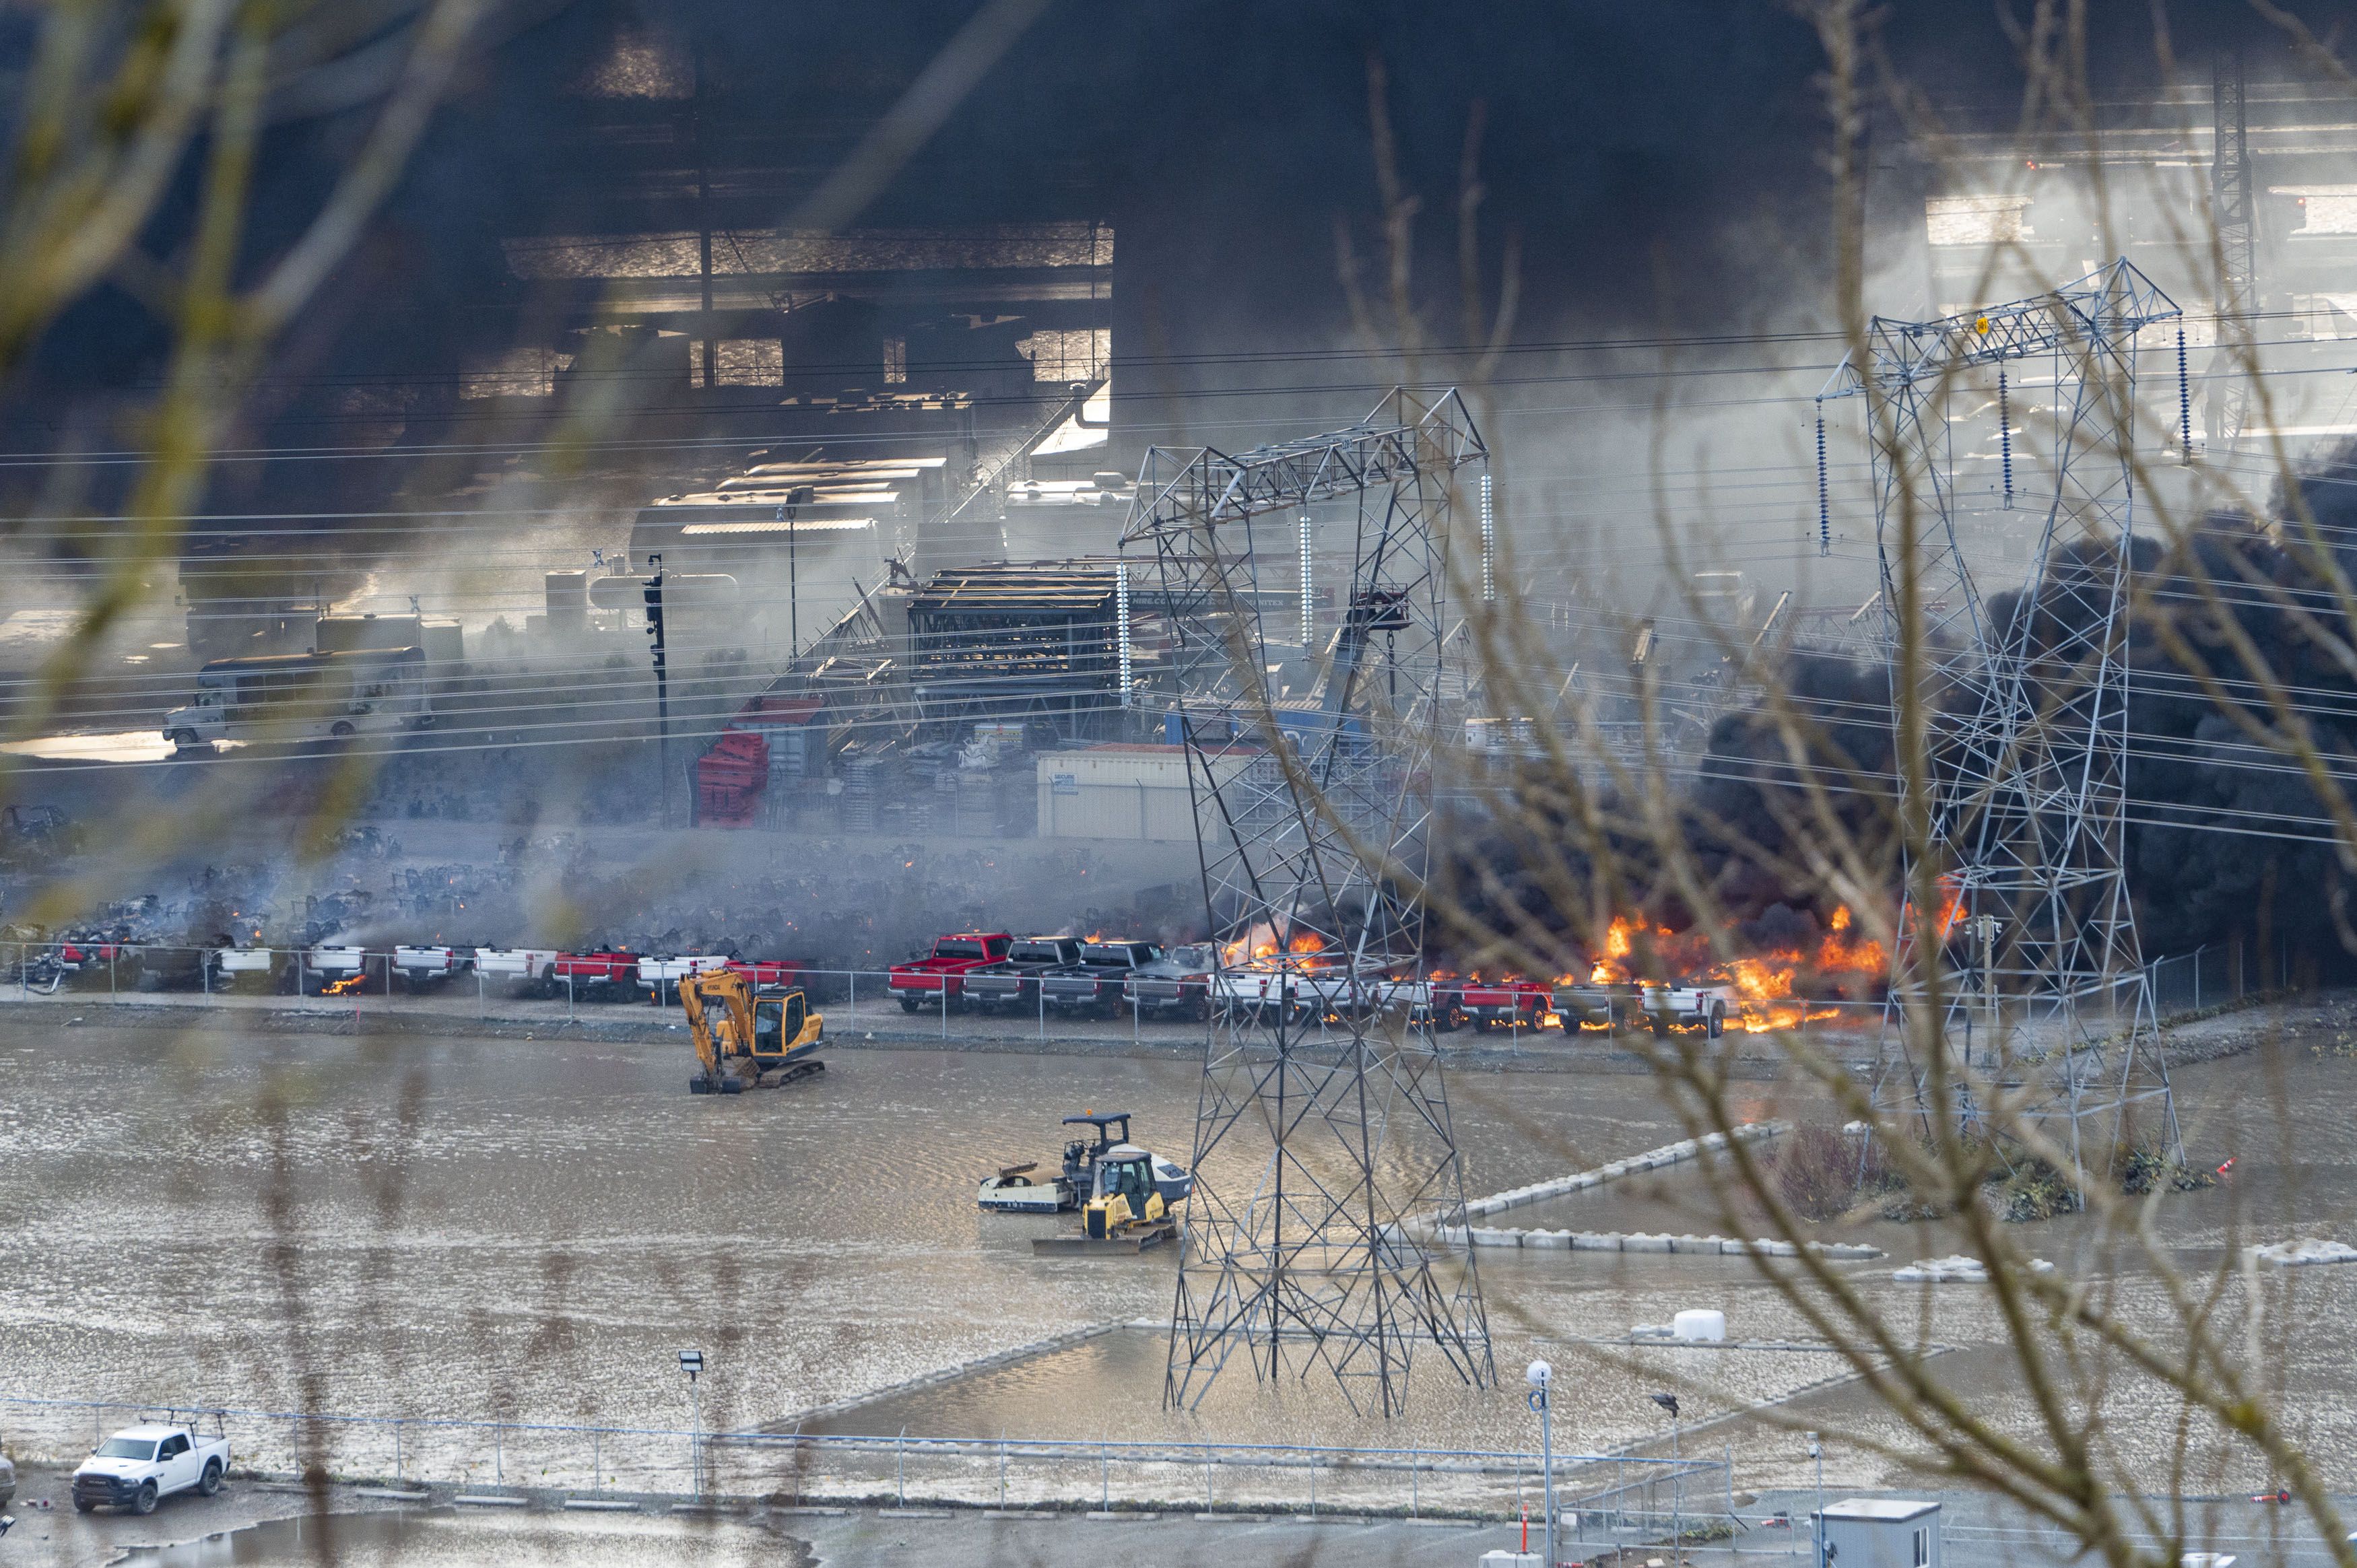  A fire at an RV dealership in the flooded Sumas Prairie in Abbotsford, British Columbia, Canada, on Wednesday, Nov. 17